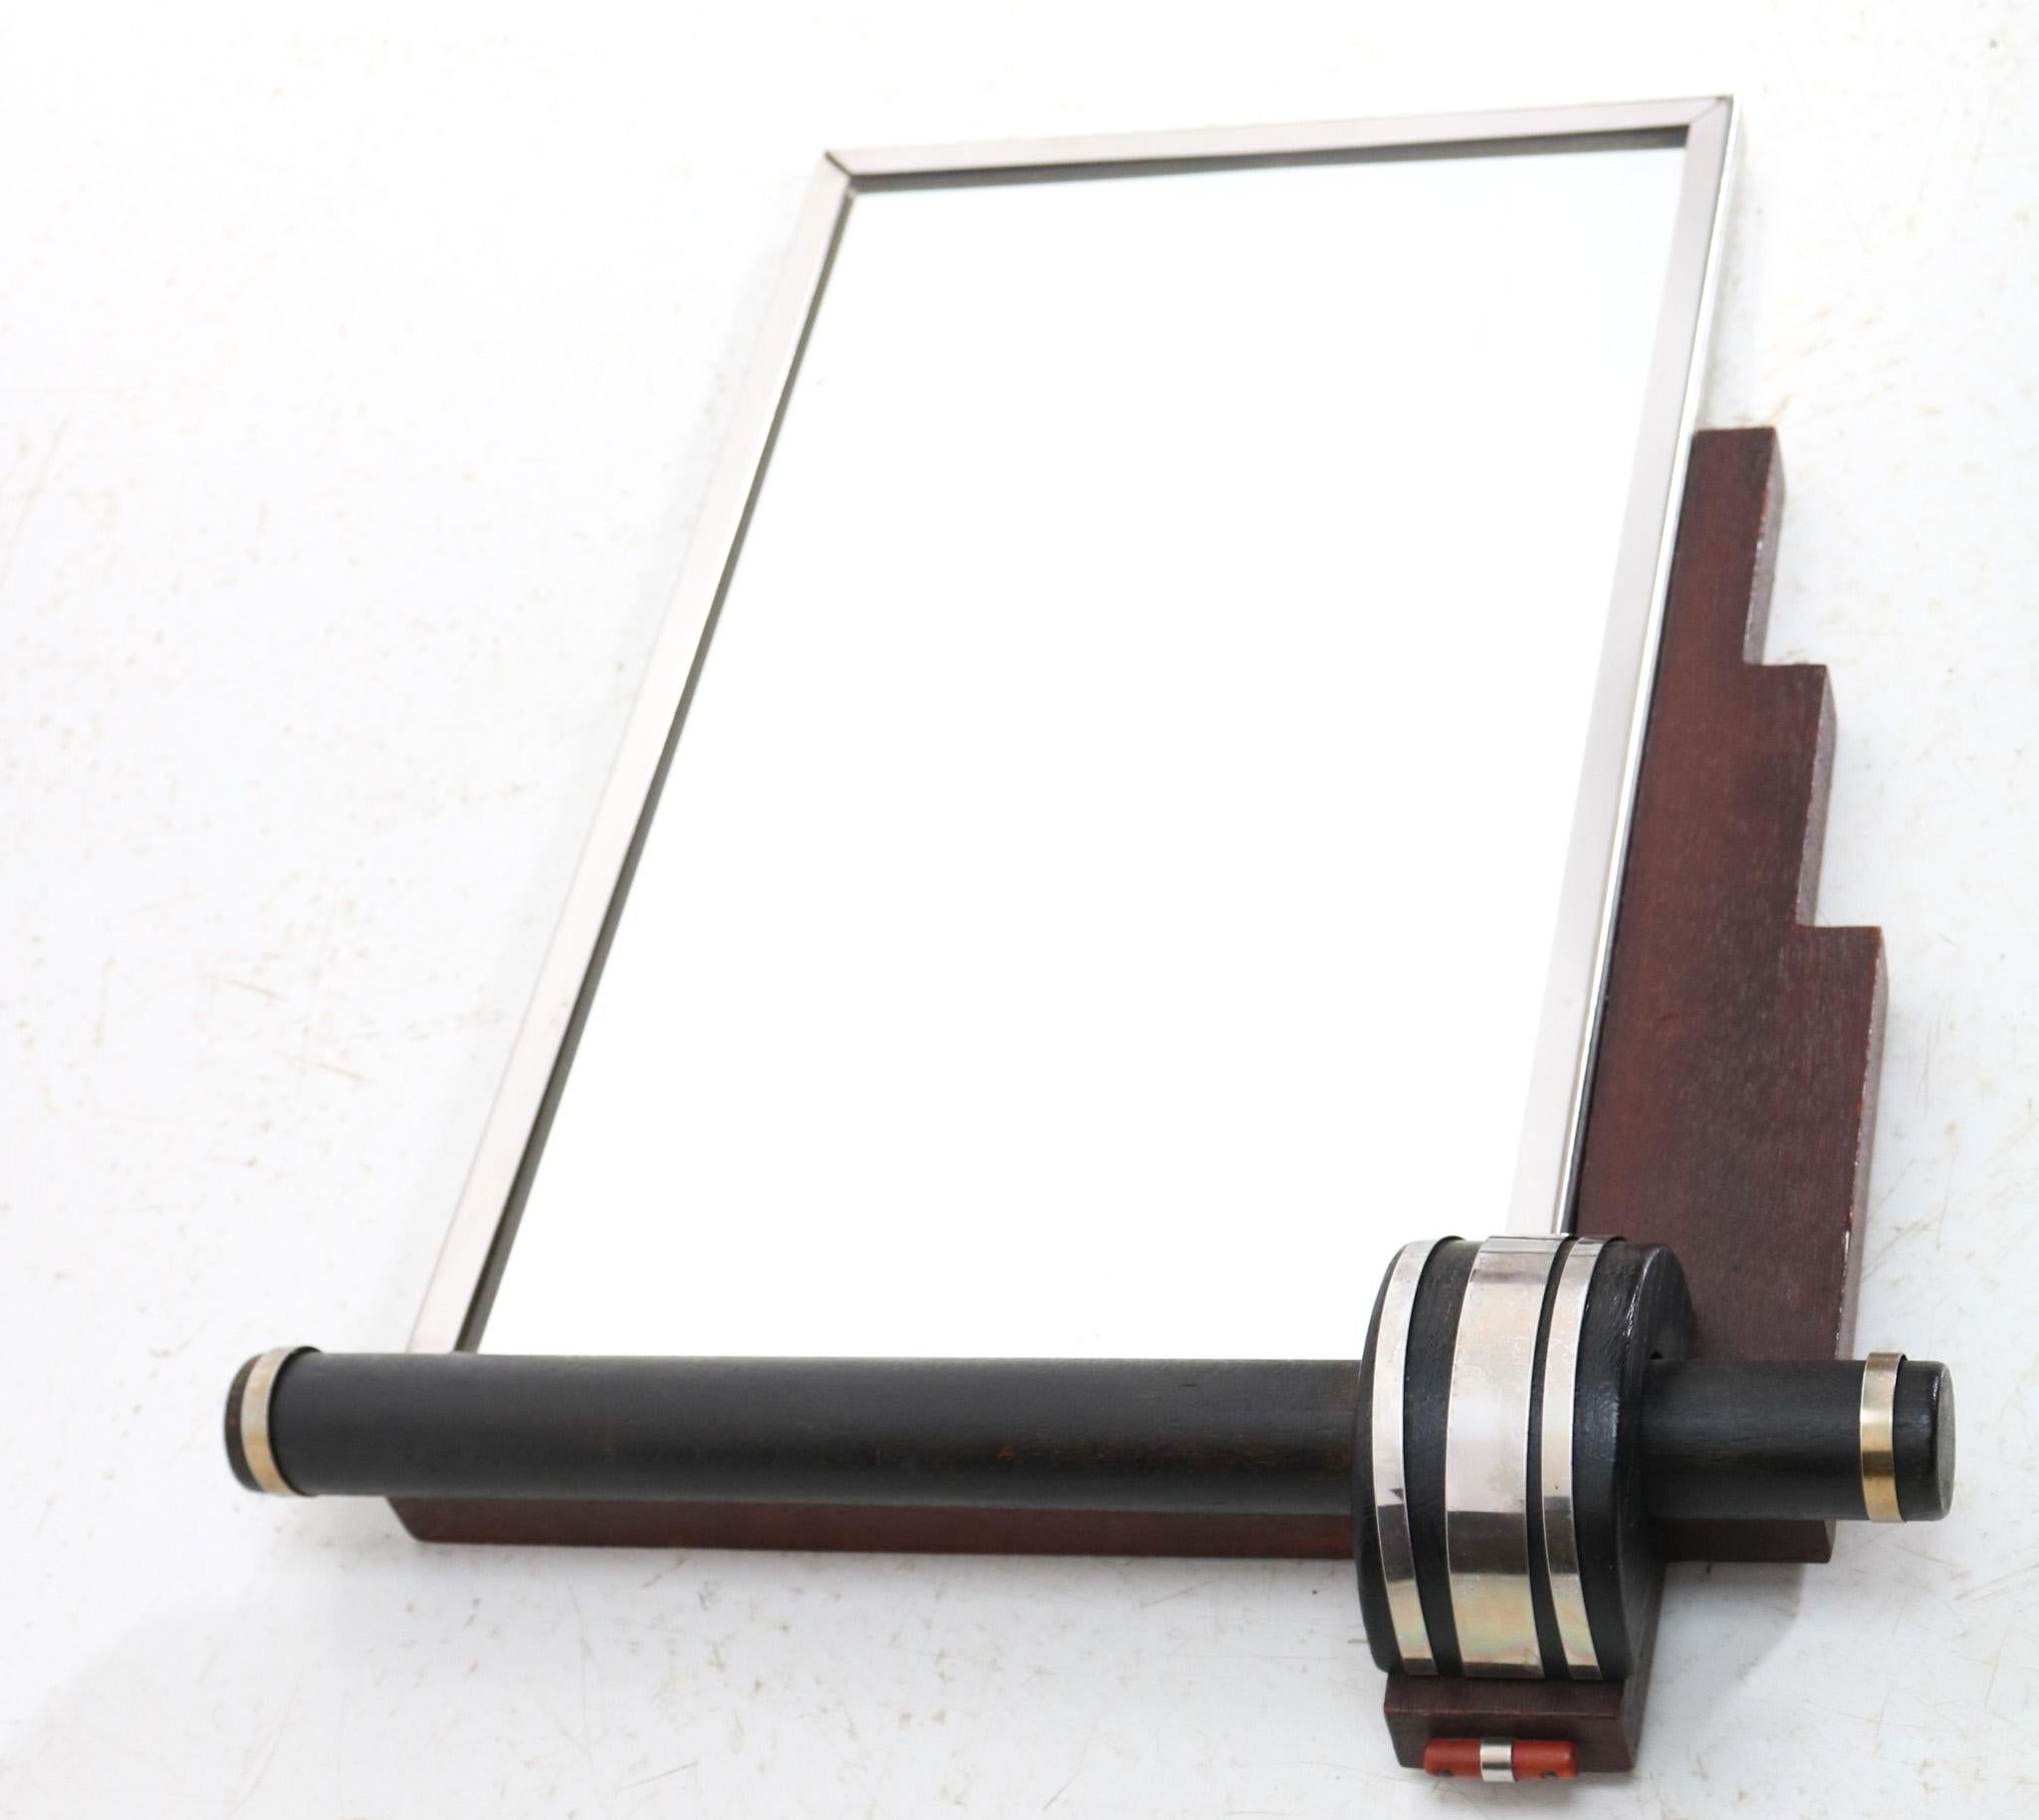 Stunning and elegant Art Deco petite wall mirror.
Striking French design from the 1930s.
Original walnut and nickel-plated brass frame with original black
lacquered lining.
The mirror is also original.
This wonderful Art Deco petite wall mirror is